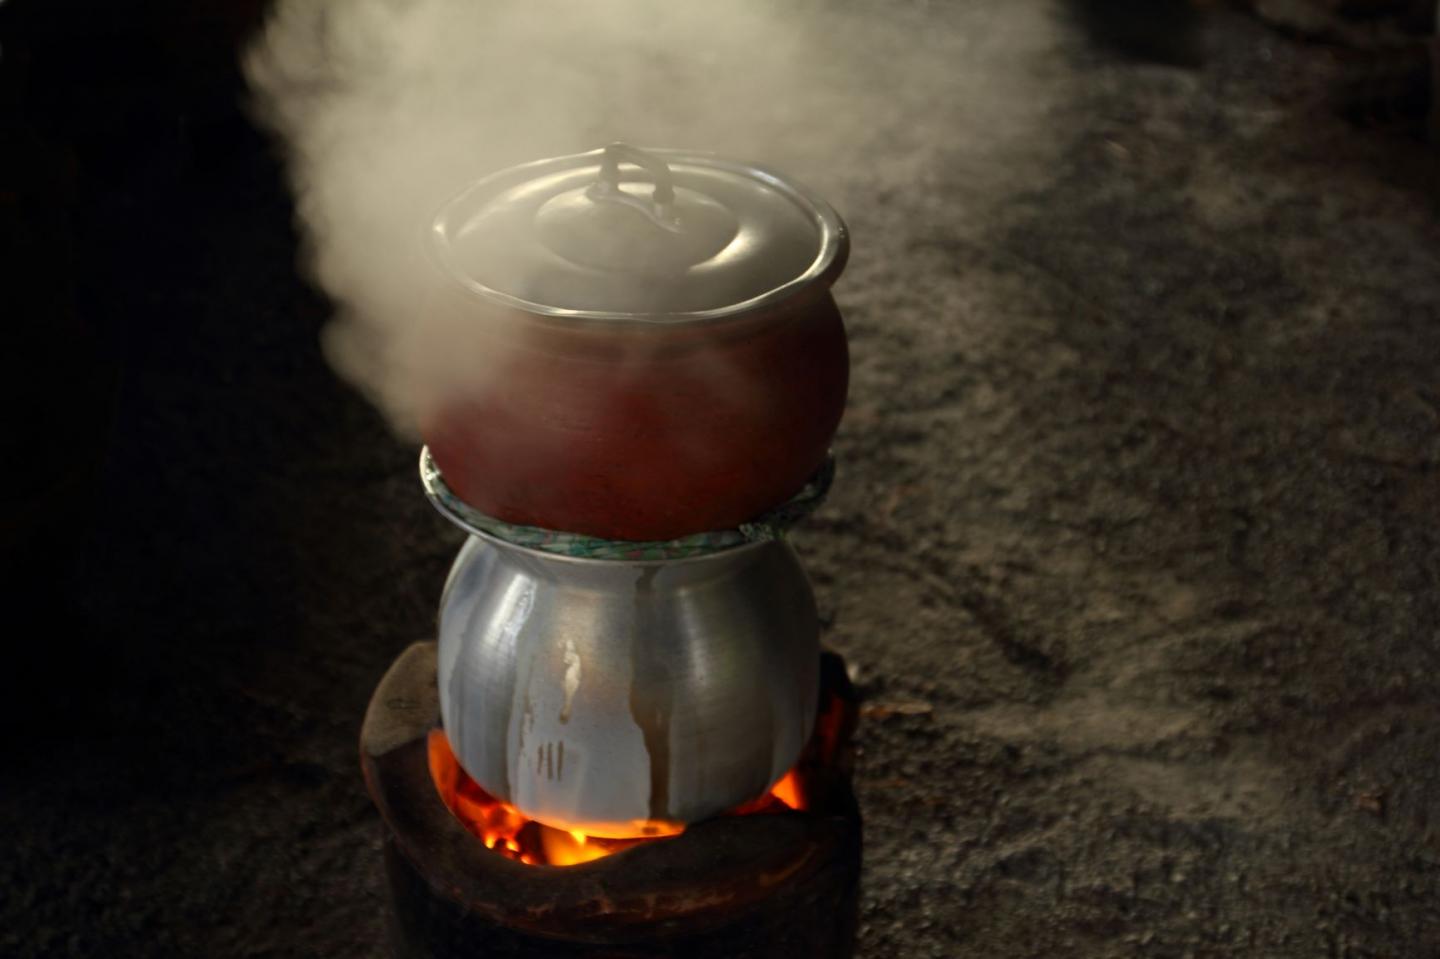 Cooking with Solid Fuels and Respiratory Health